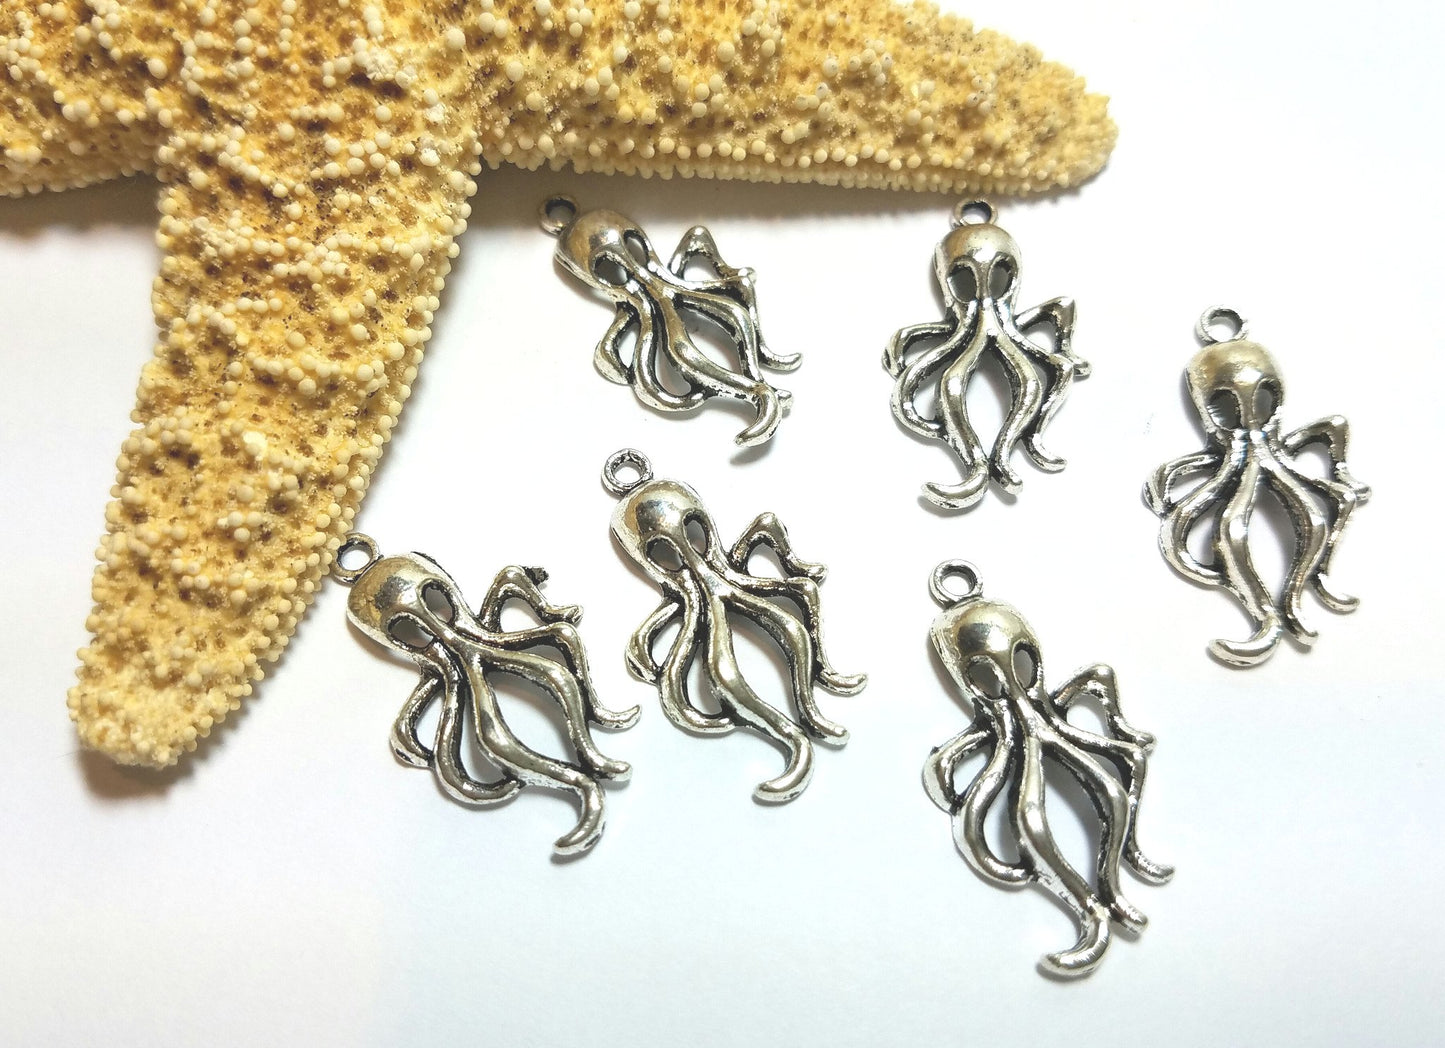 6 Octopus Charms